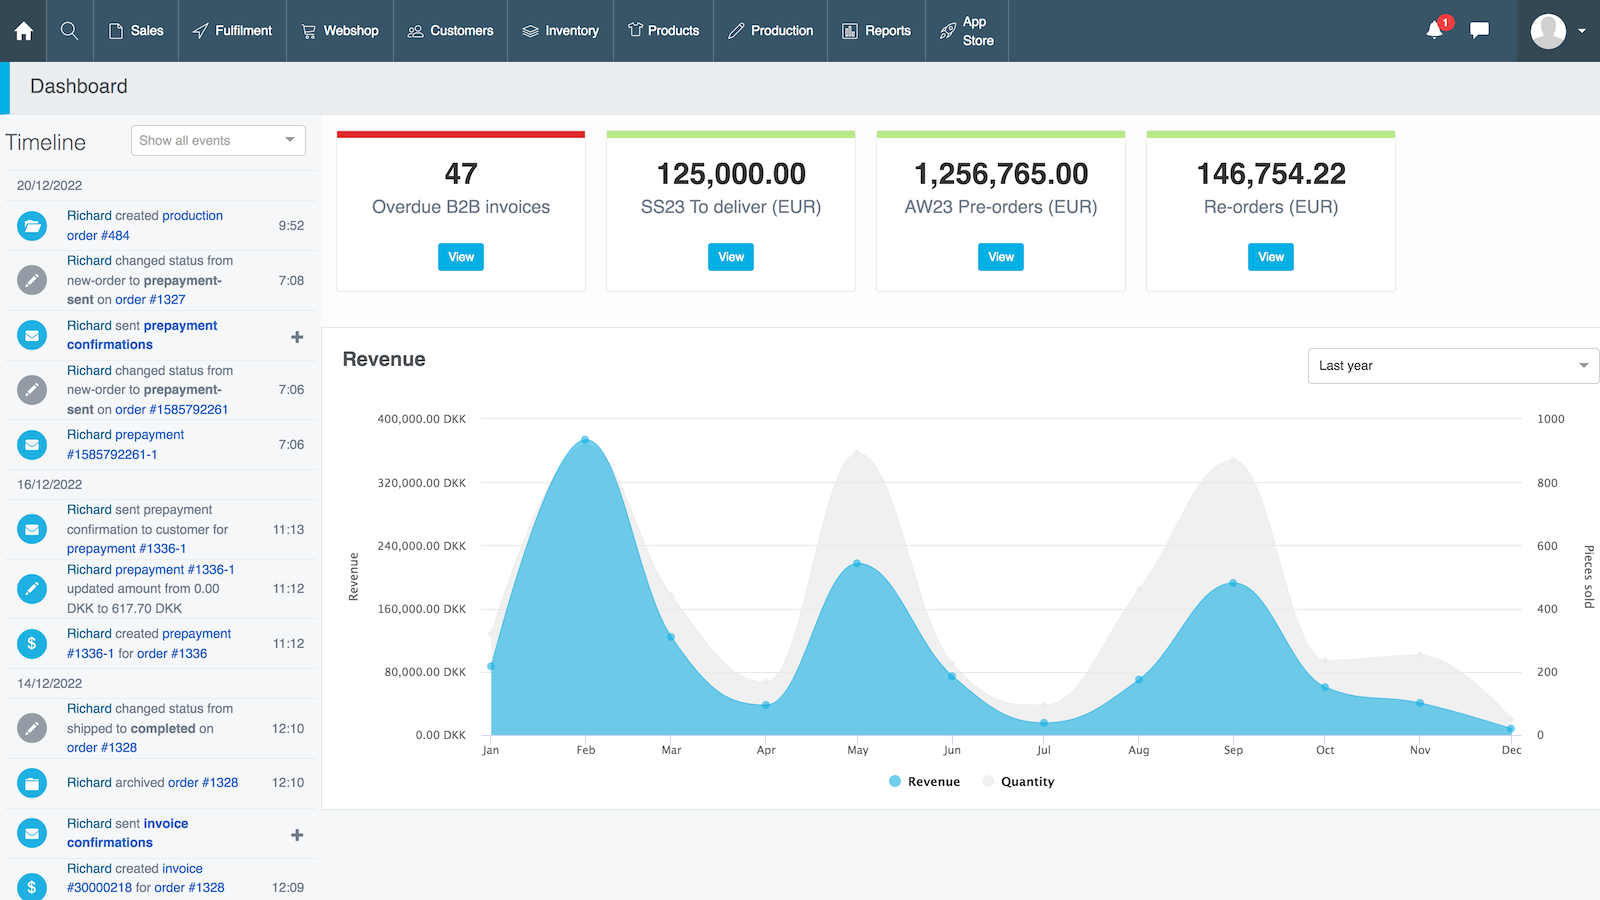 Your dashboard with an overview of your business